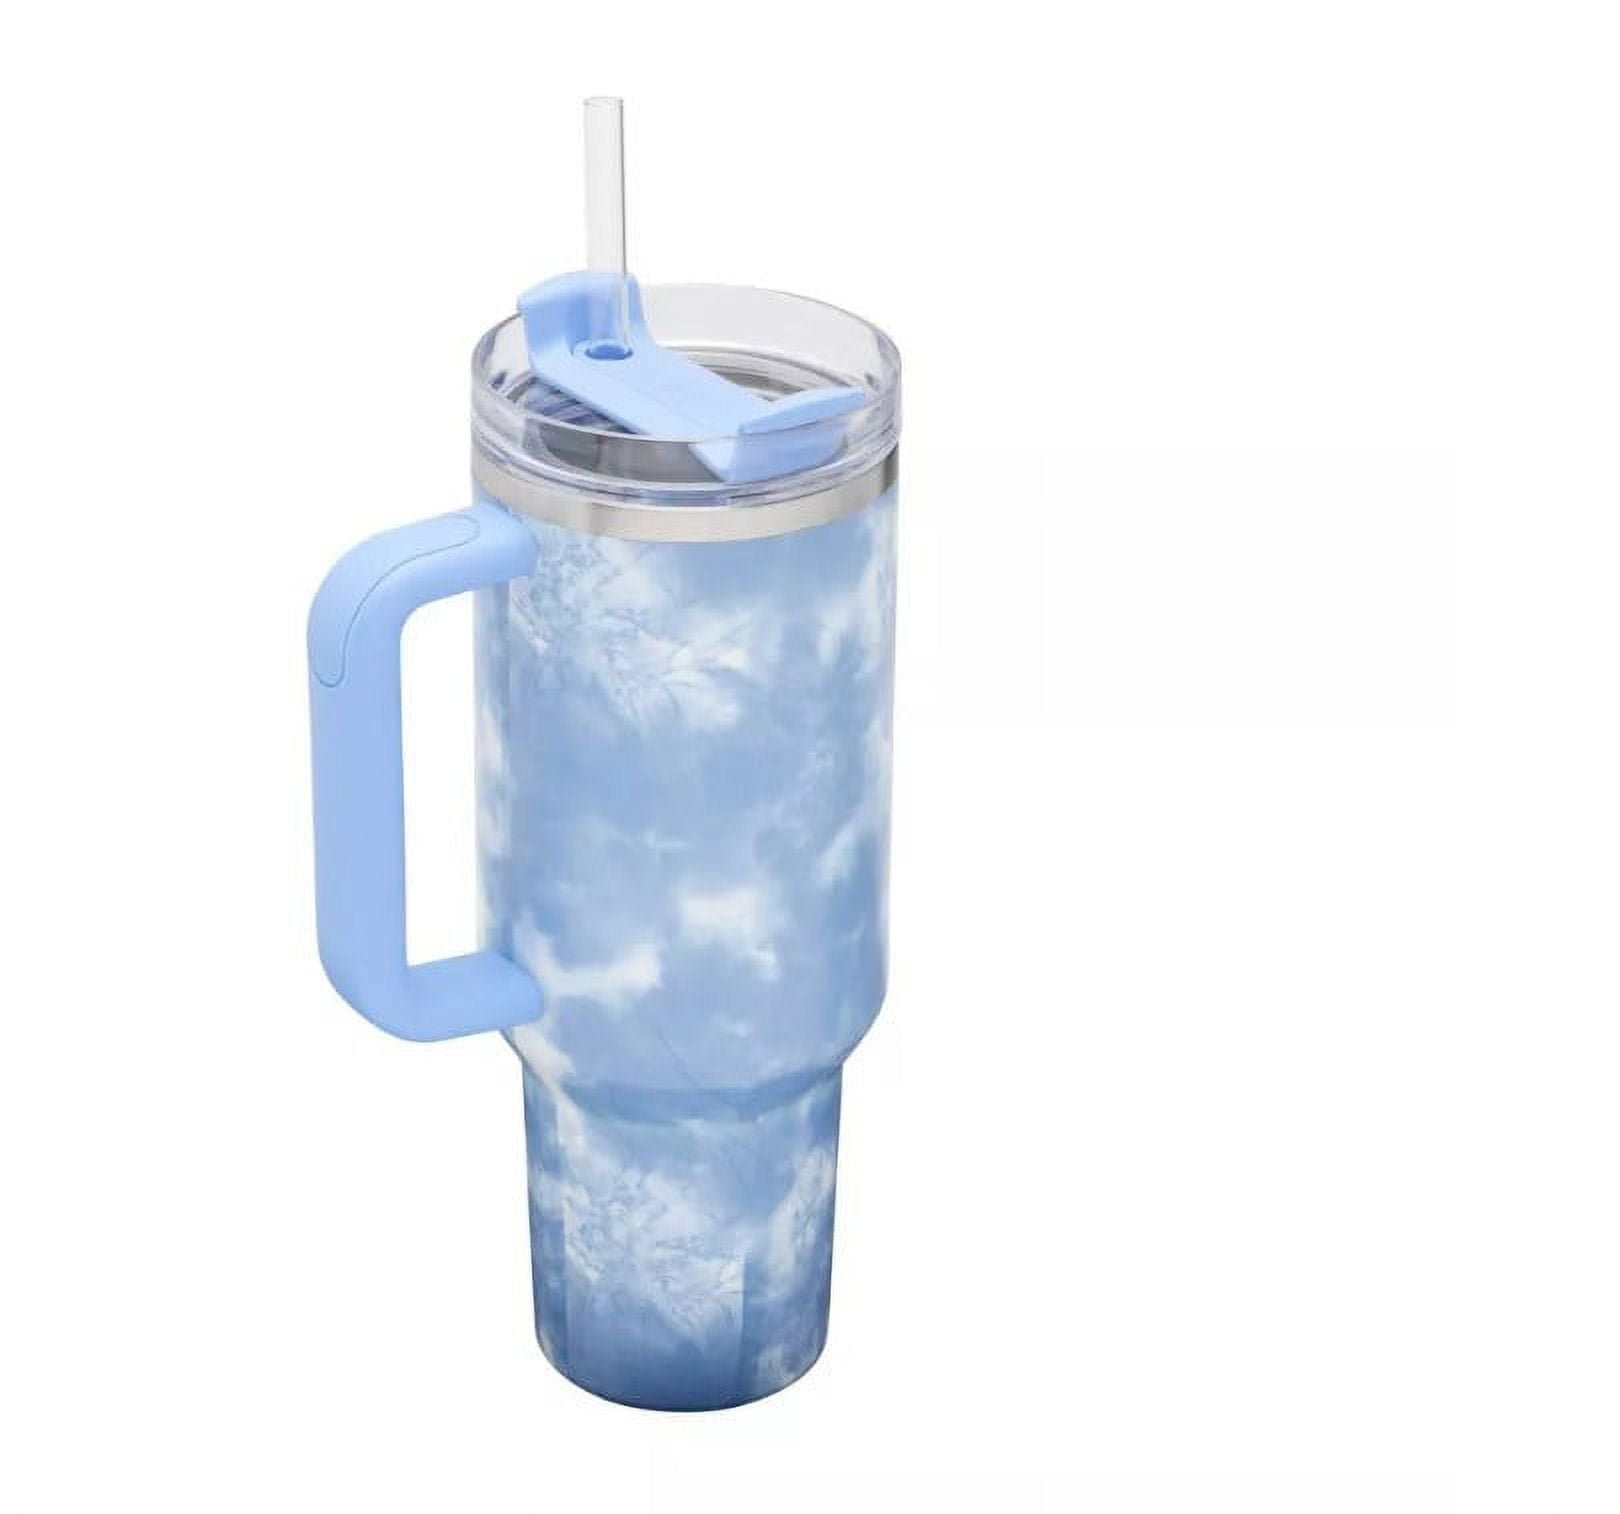 Stanley Quencher Tie Dye Tumblers for Sale in Fort Lauderdale, FL